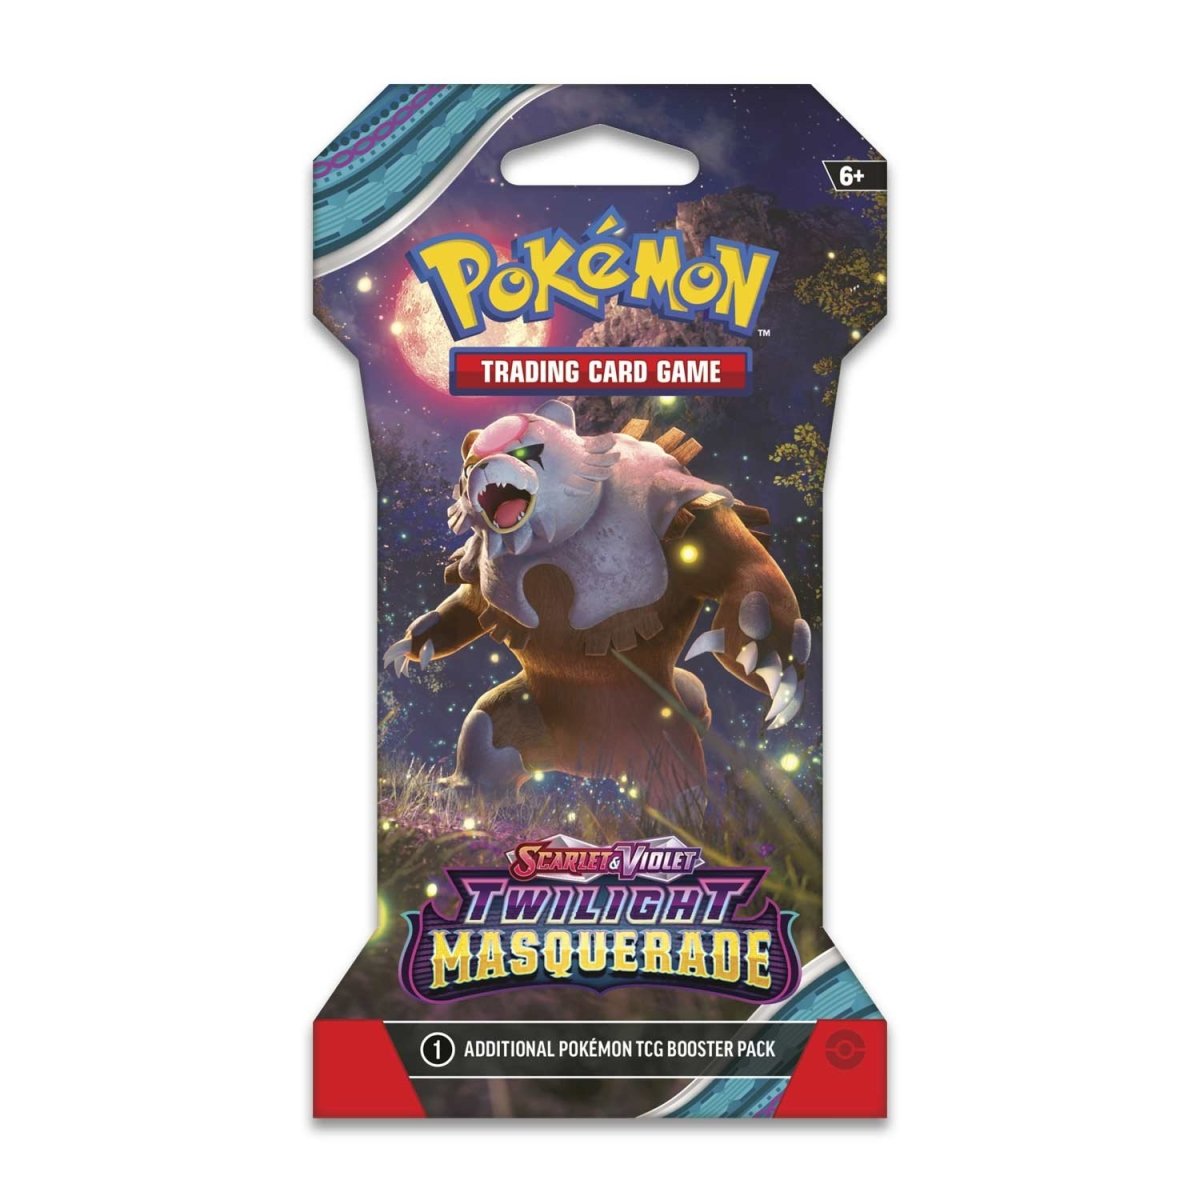 Pokémon TCG: New Twilight Masquerade Booster Preorders Get a Big Discount  at Best Buy - IGN